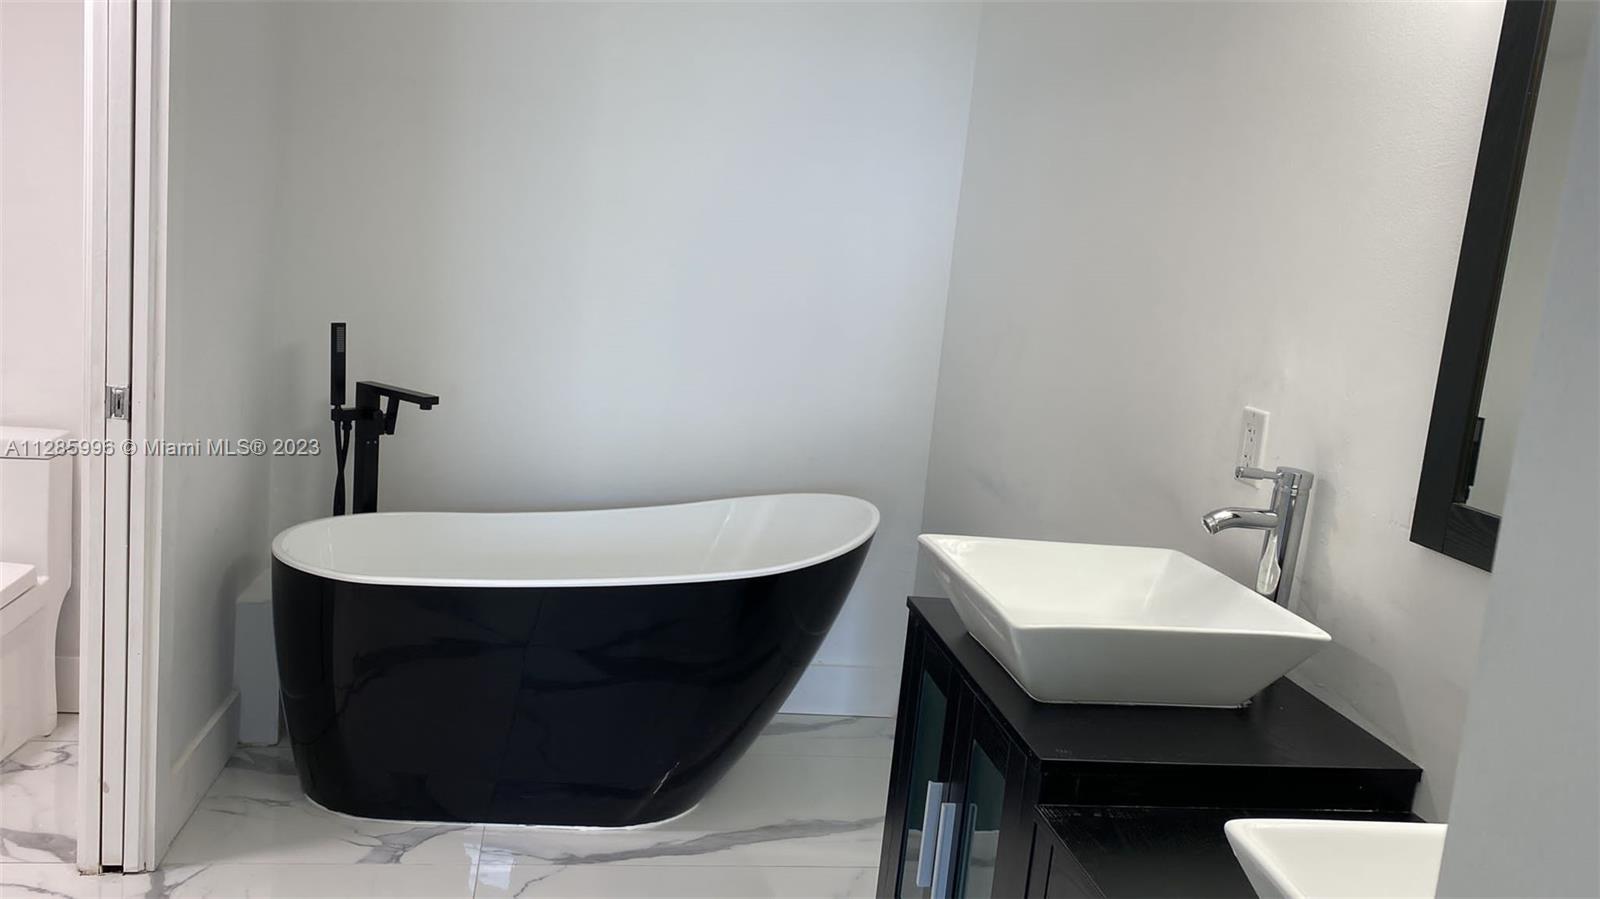 Newly Installed Freestanding Tub